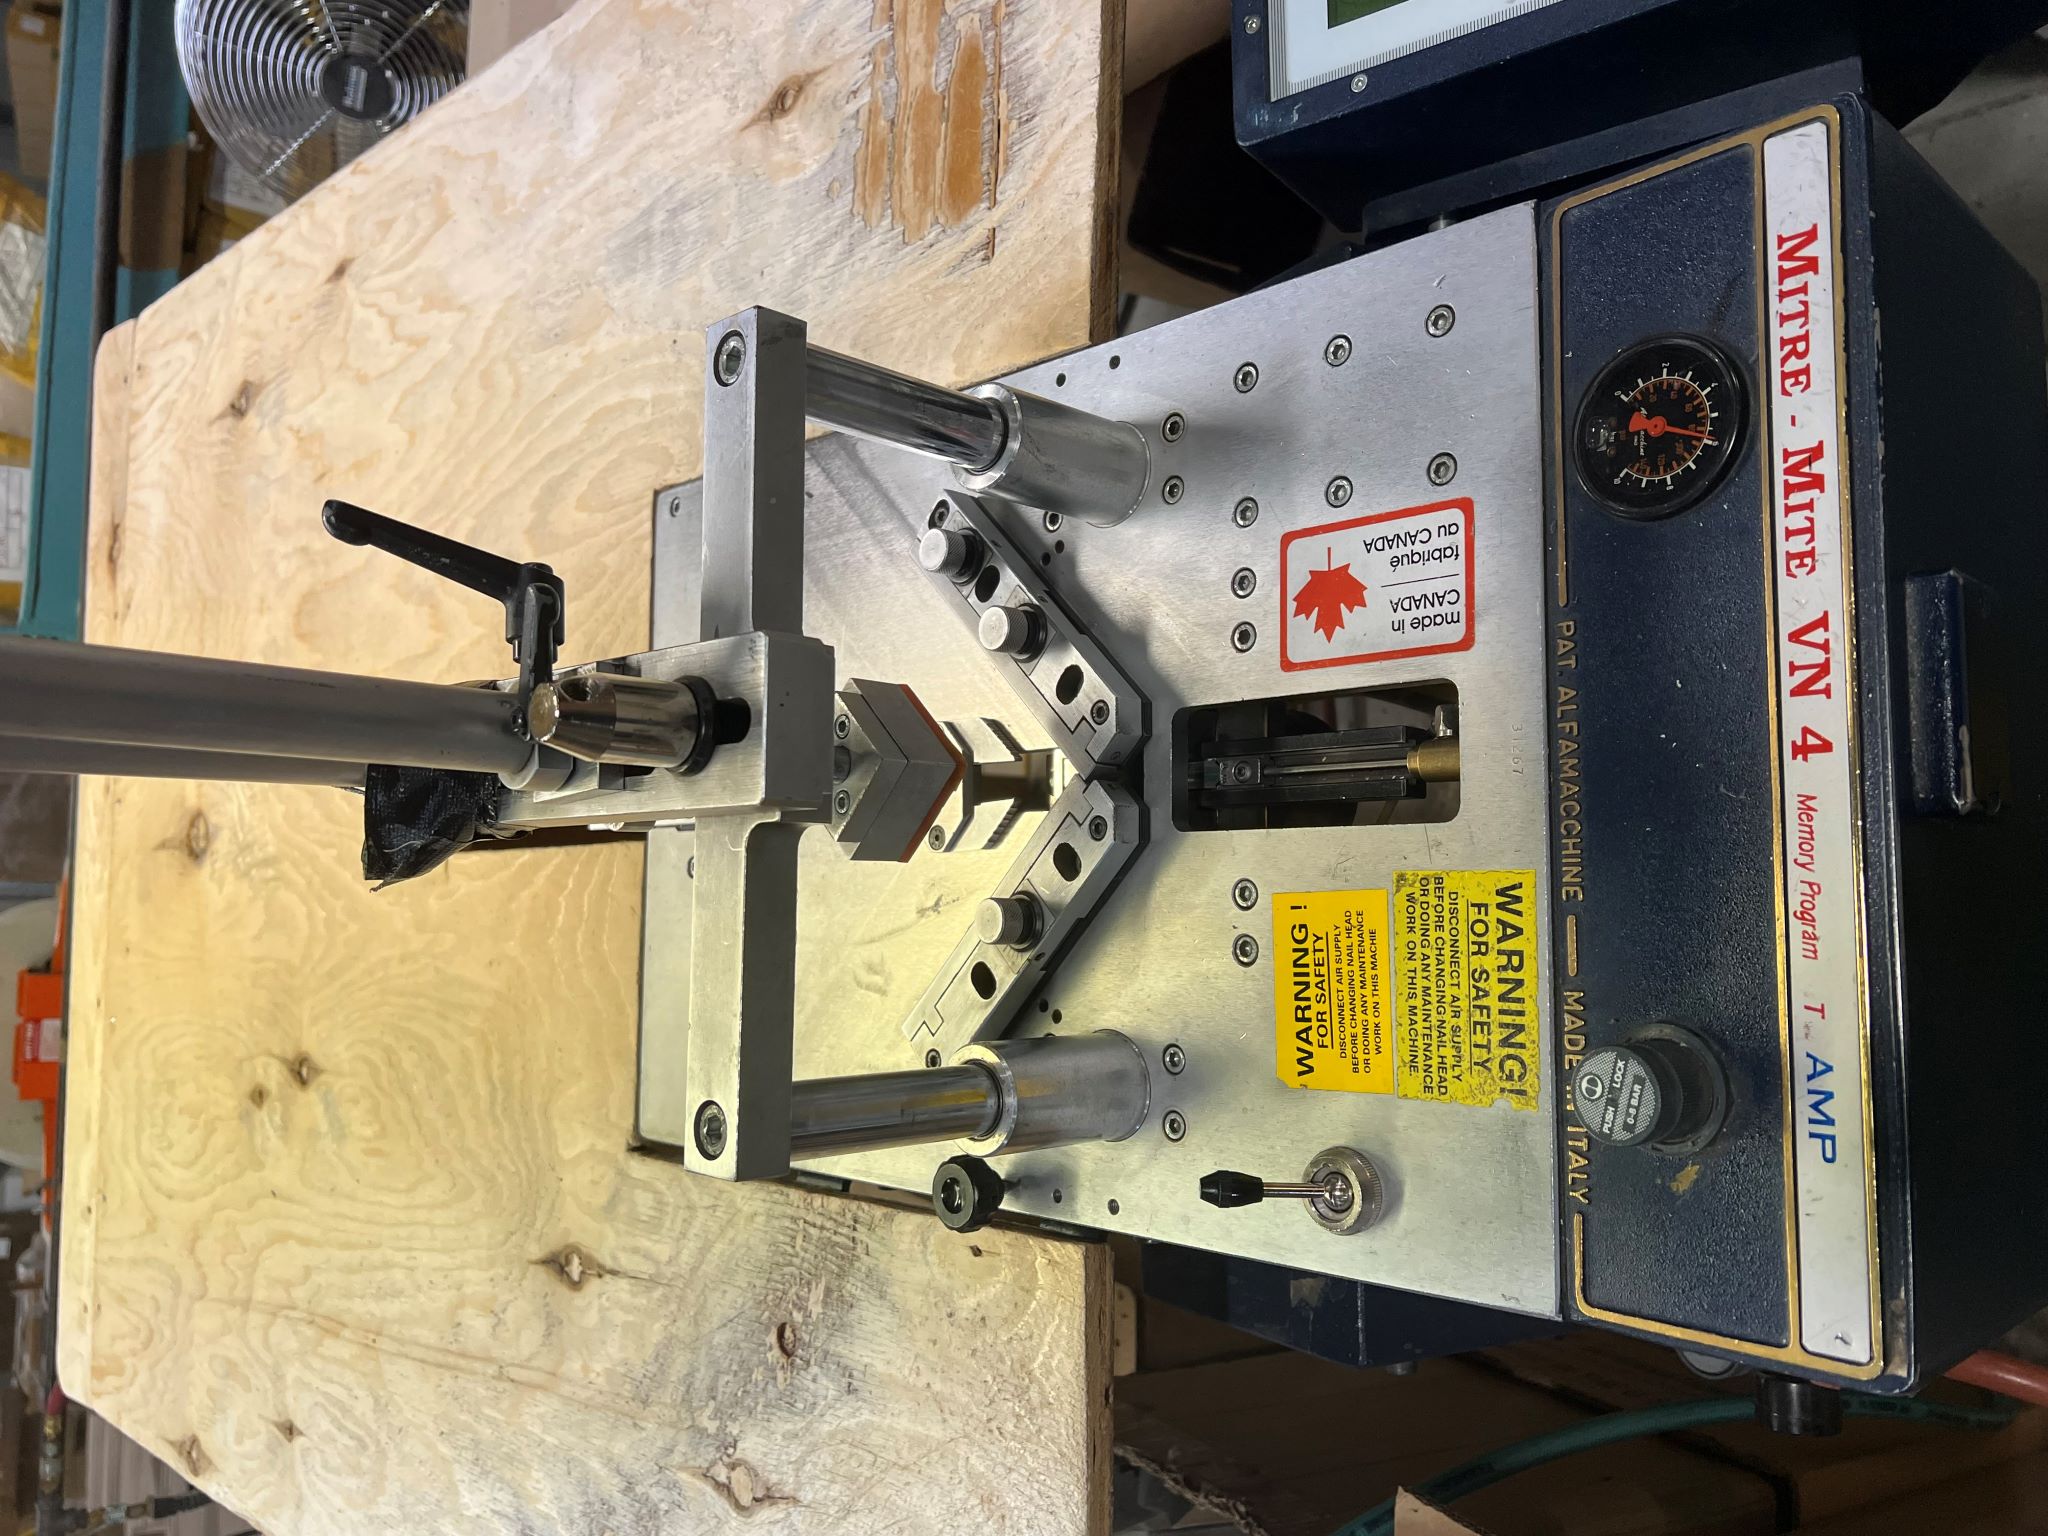 Equipment Lot: Fletcher AMP U-500 / U500 Single Channel Programmable Joiner, Fletcher AMP T-400 / T400 Double Mitre Saw, Hammond Power Solutions HPS SG3A0015PB 15KVA Sentinel Series Transformer, & ITW AMP VN4MP Programmable Frame Joiner